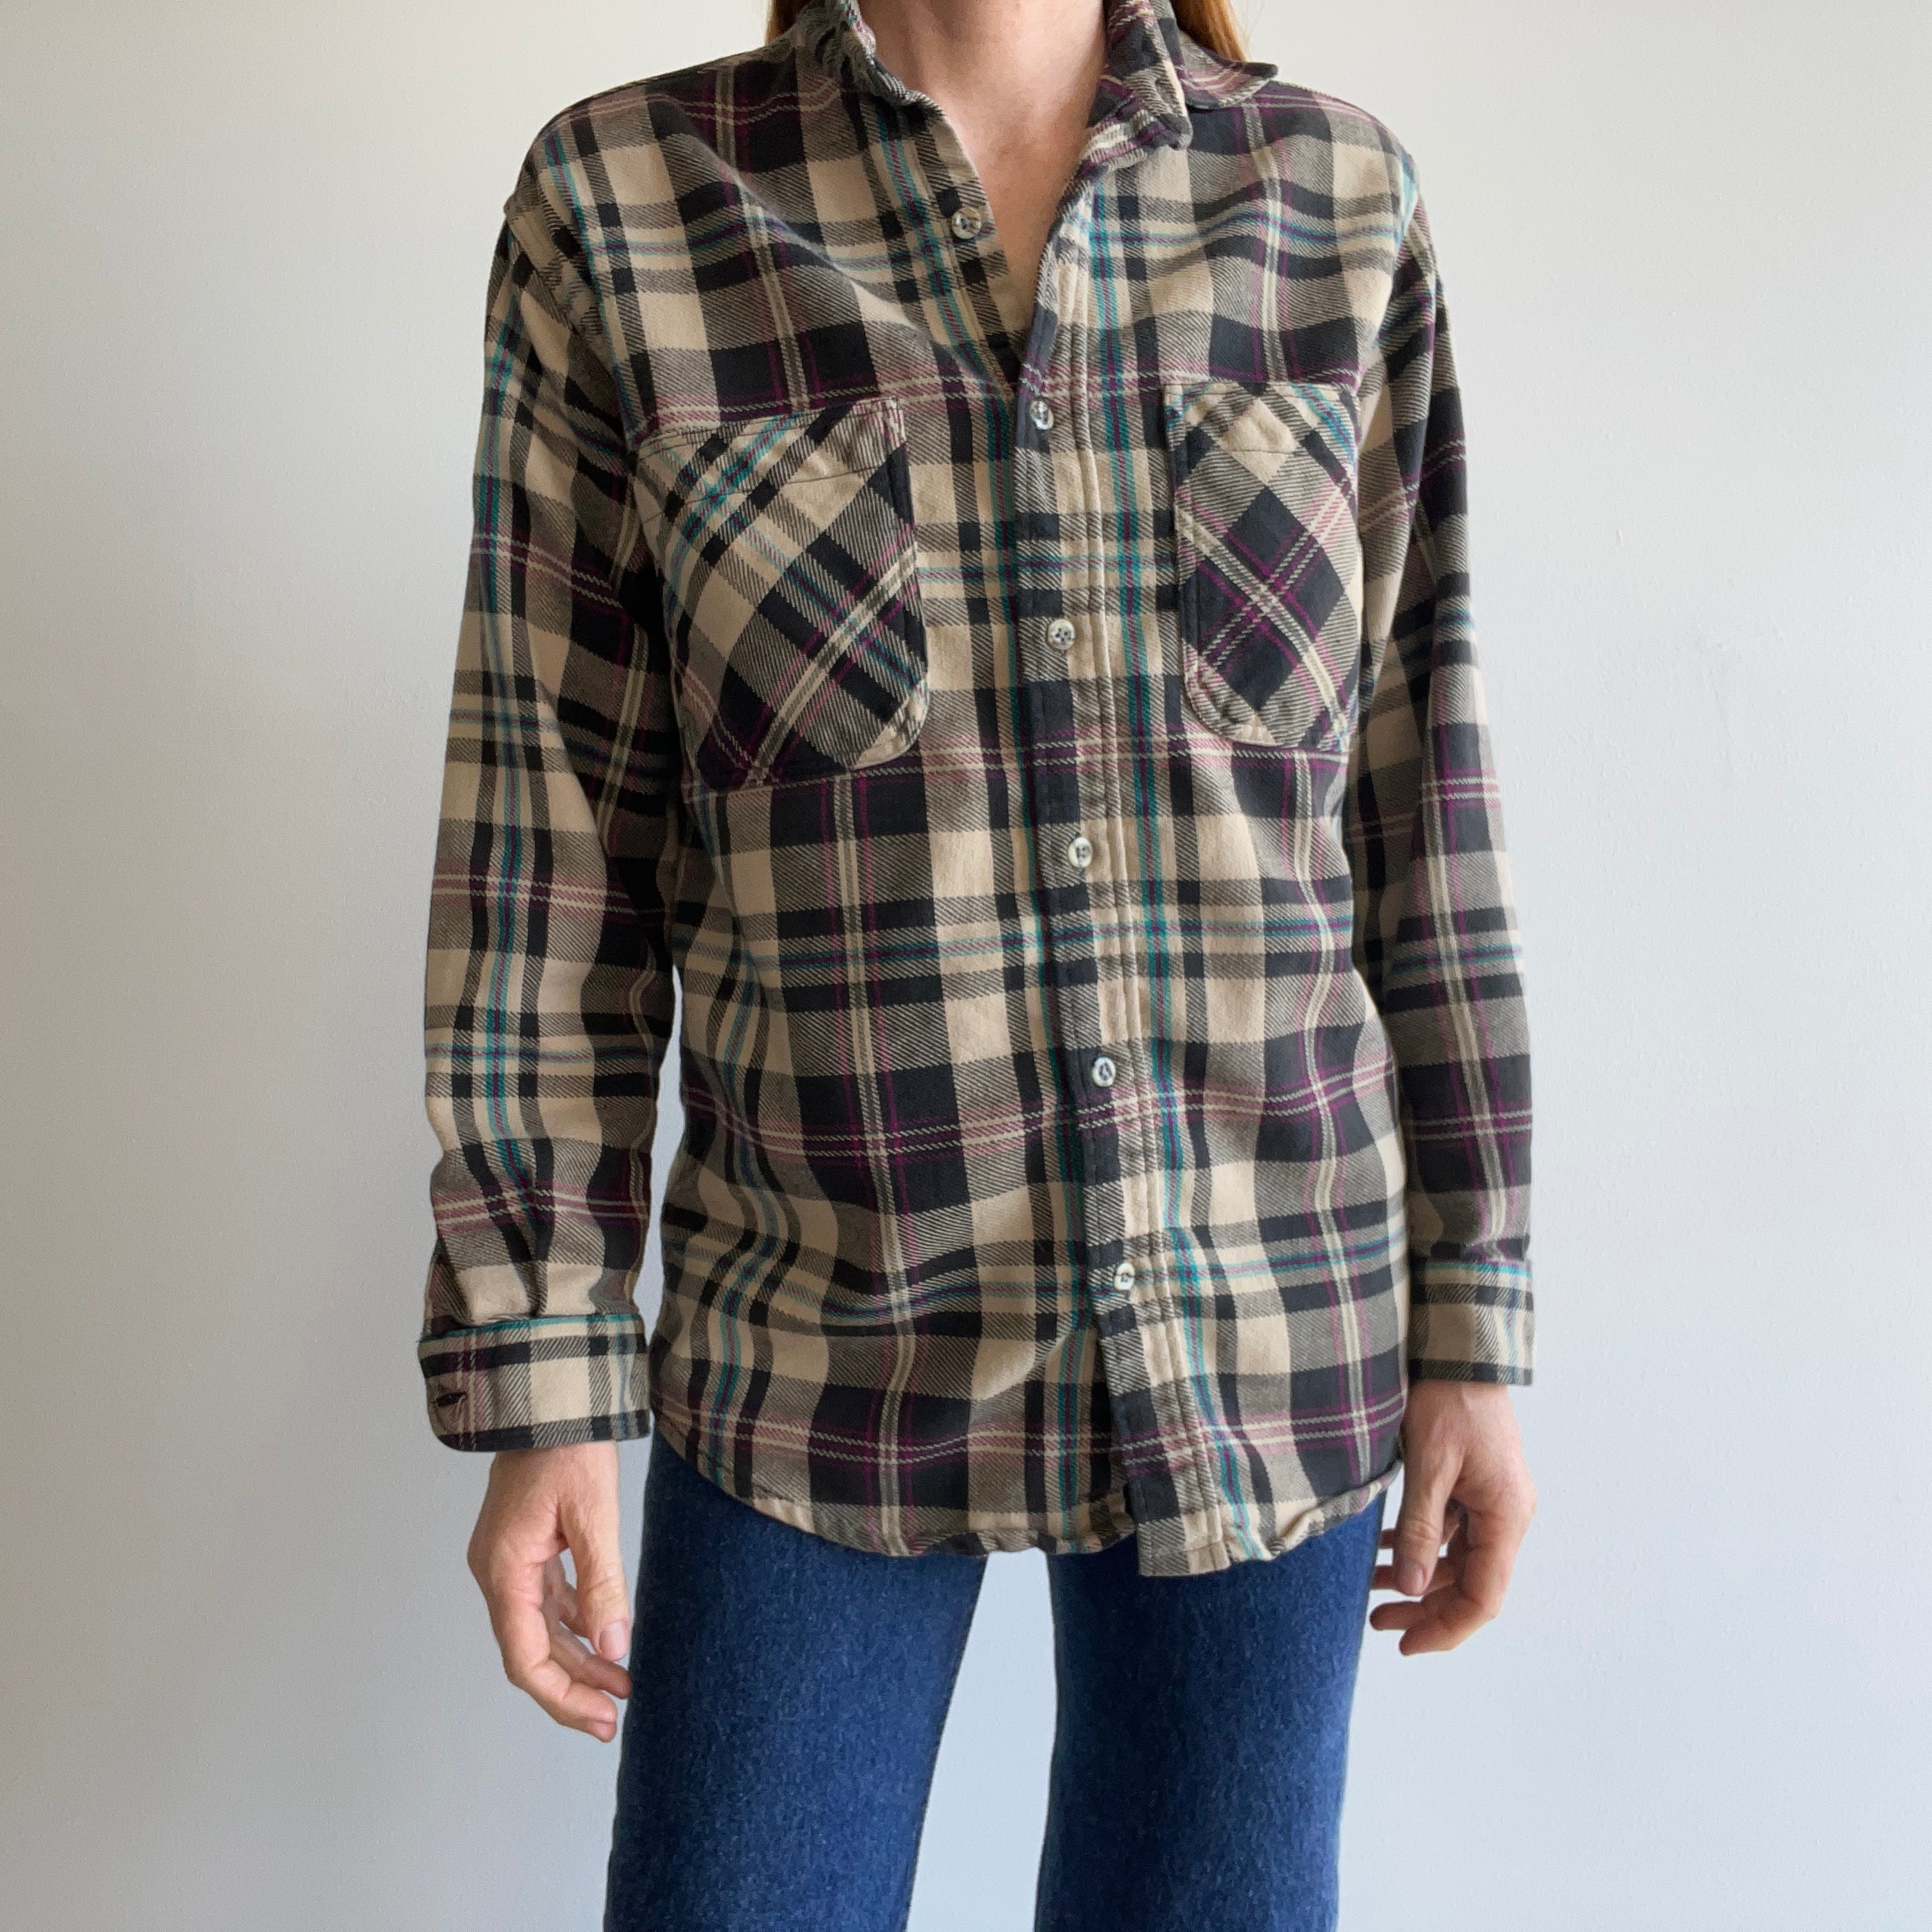 1980/90s Big Mac Worn and Mended Cotton Flannel